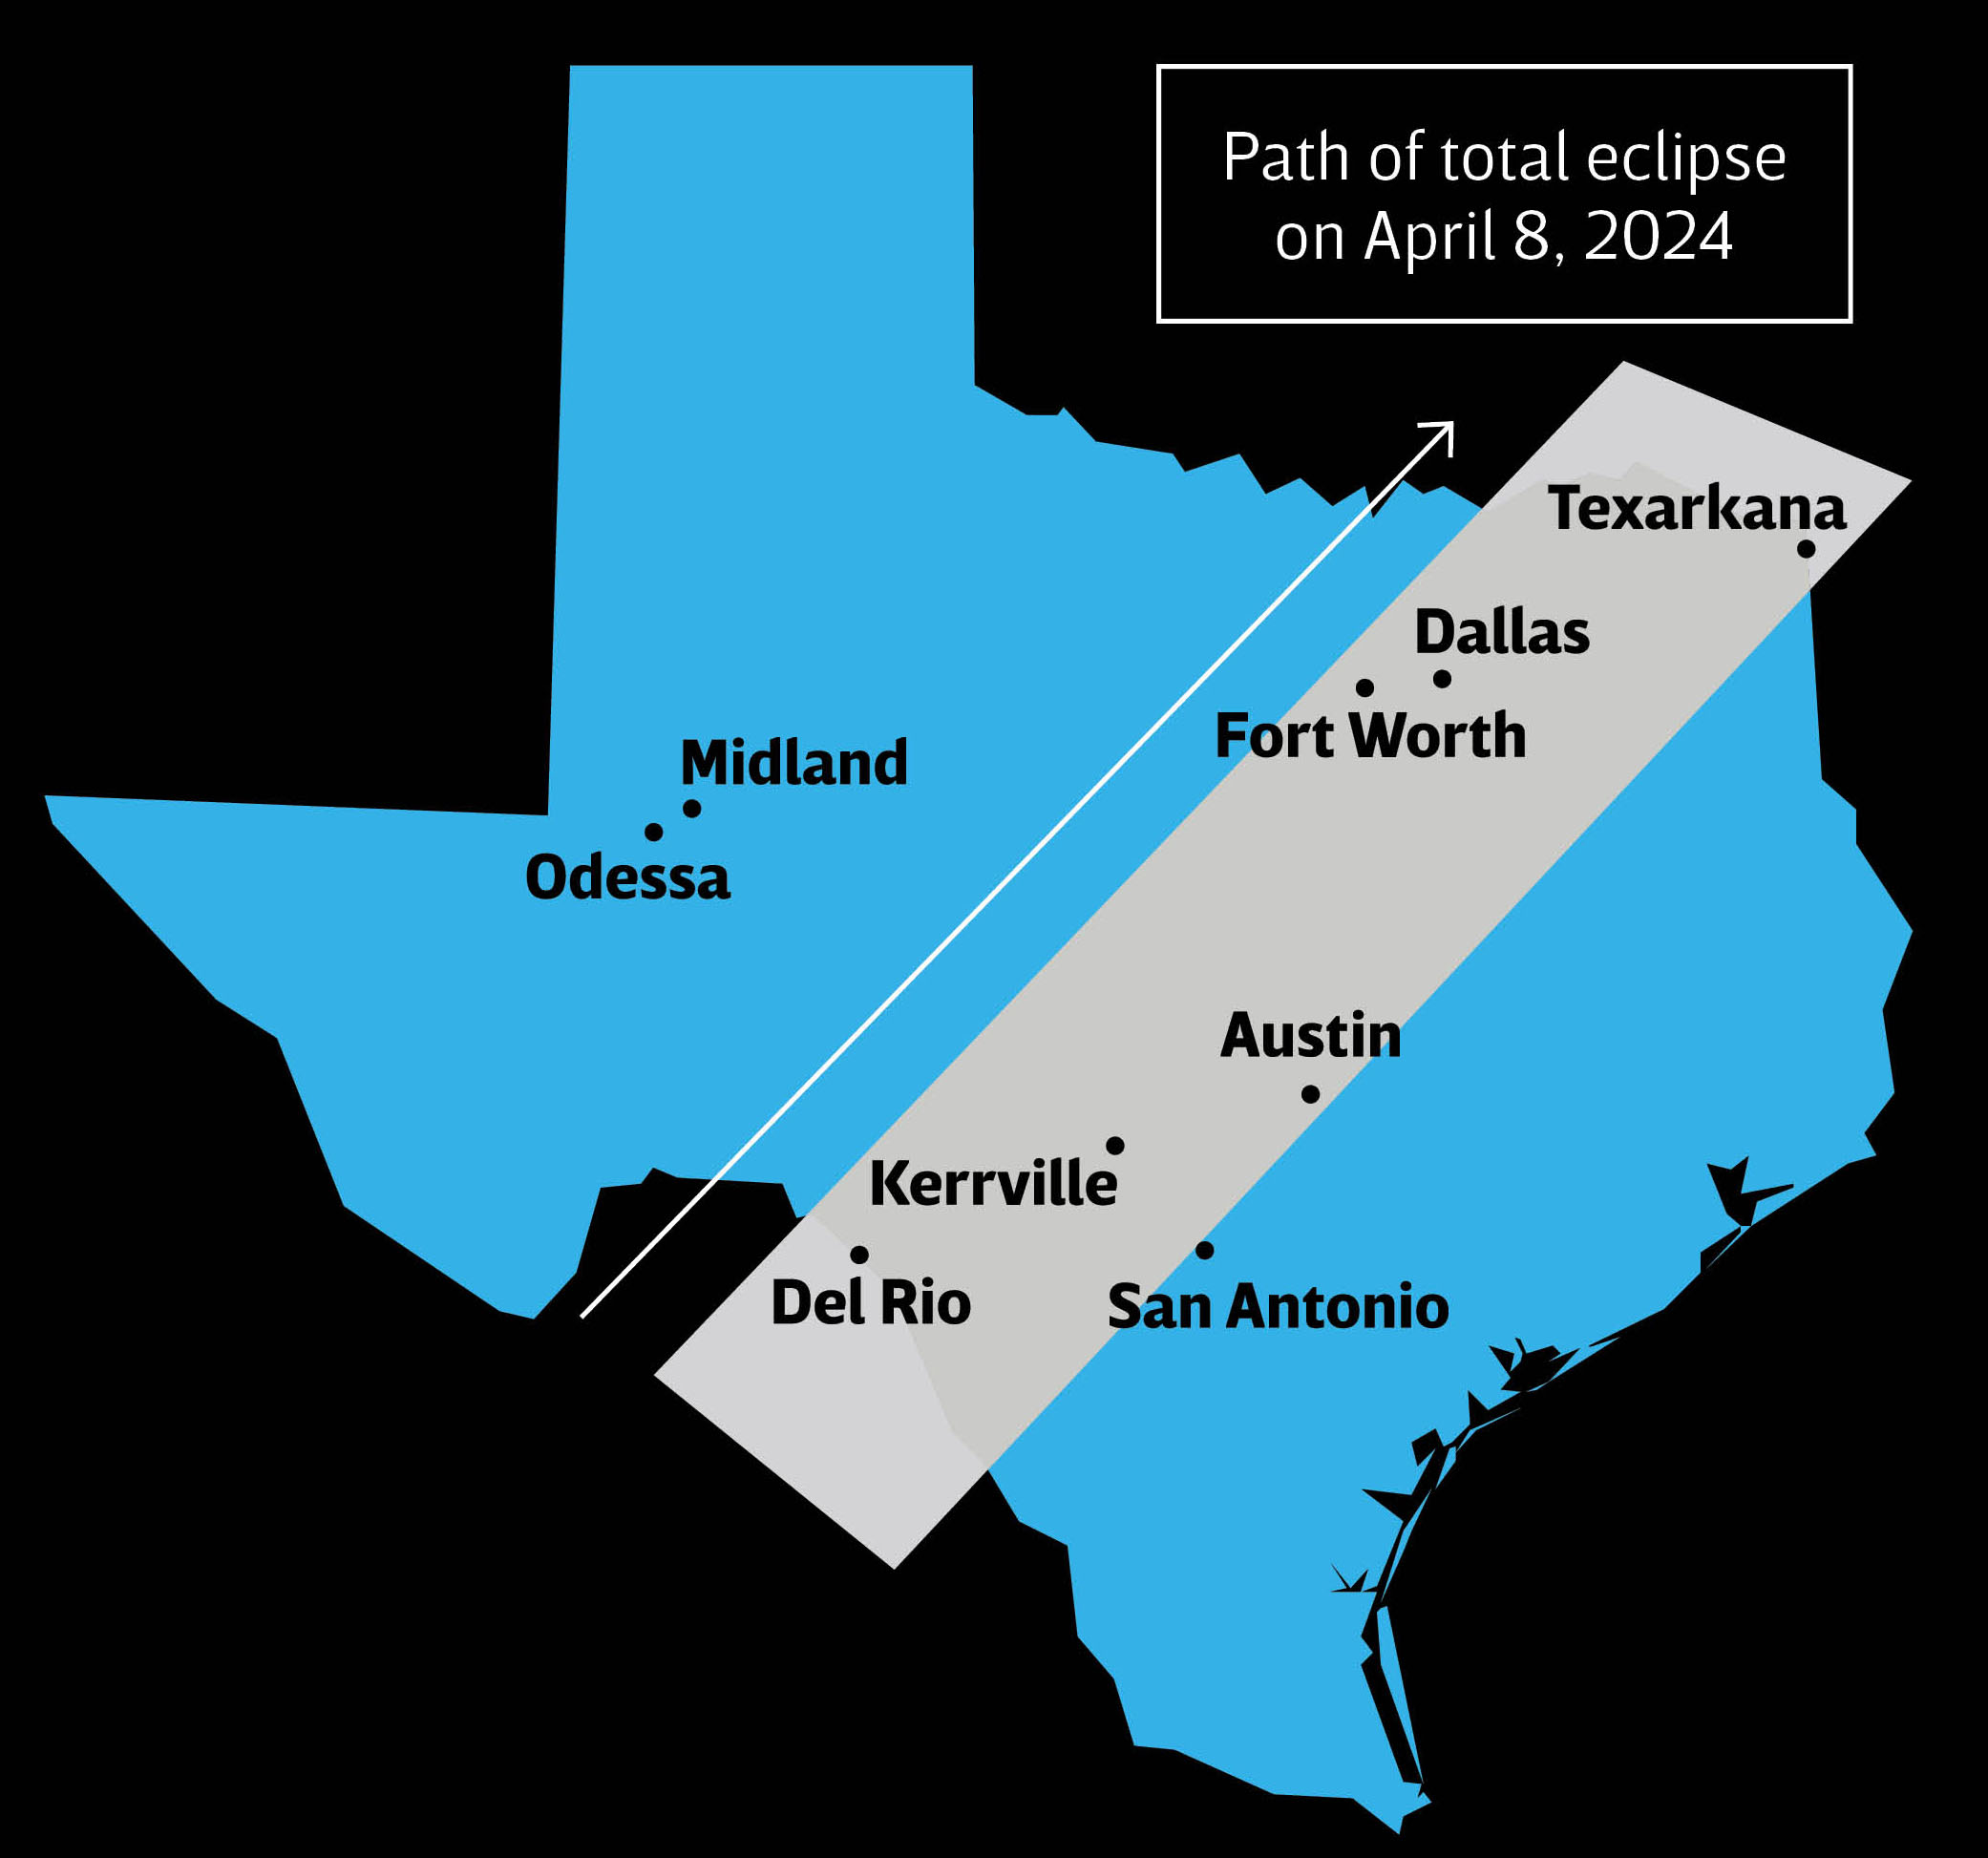 A map showing the path of the April 8 eclipse across numerous cities in Texas